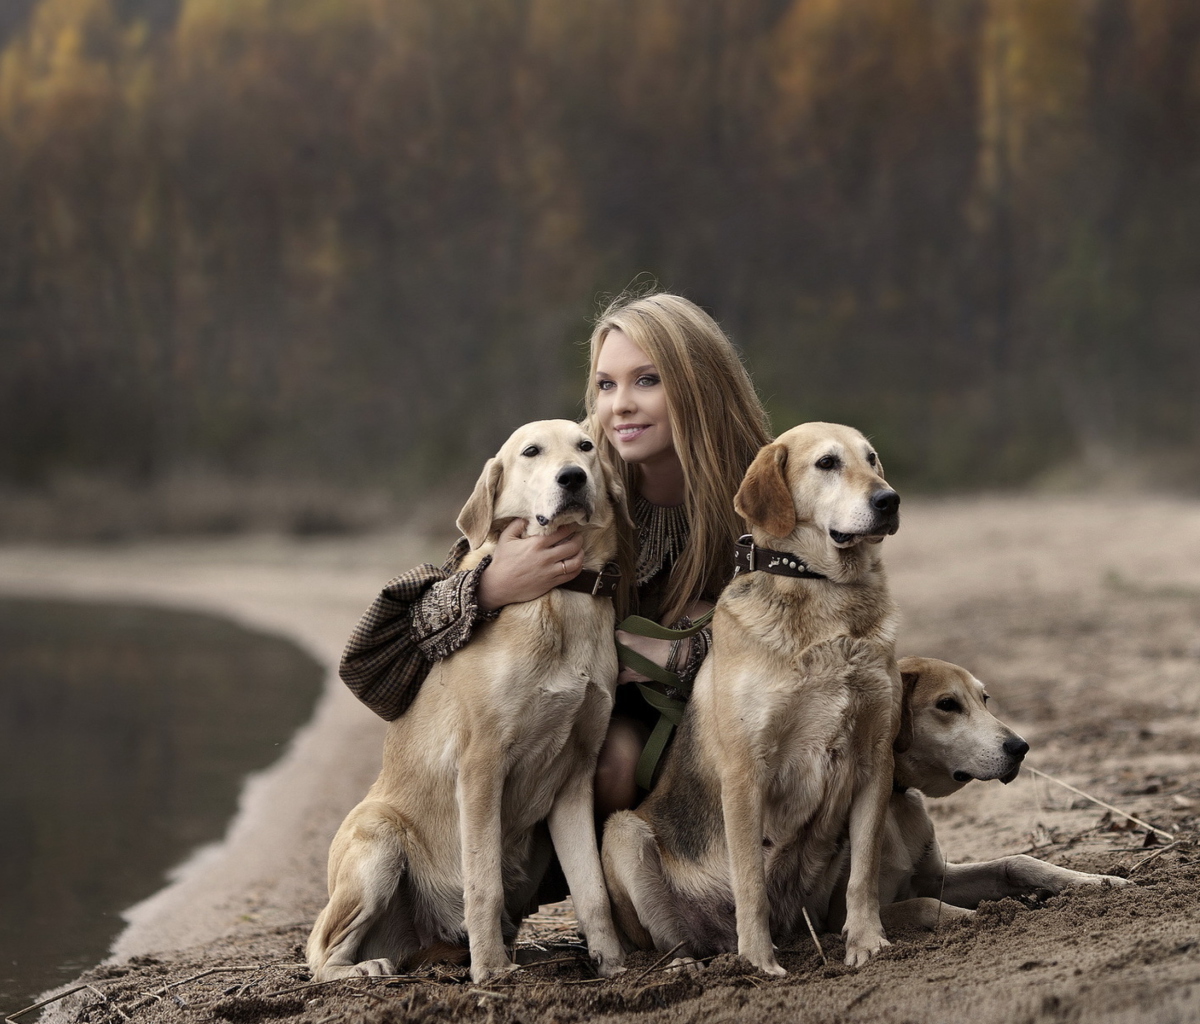 Girl With Dogs wallpaper 1200x1024